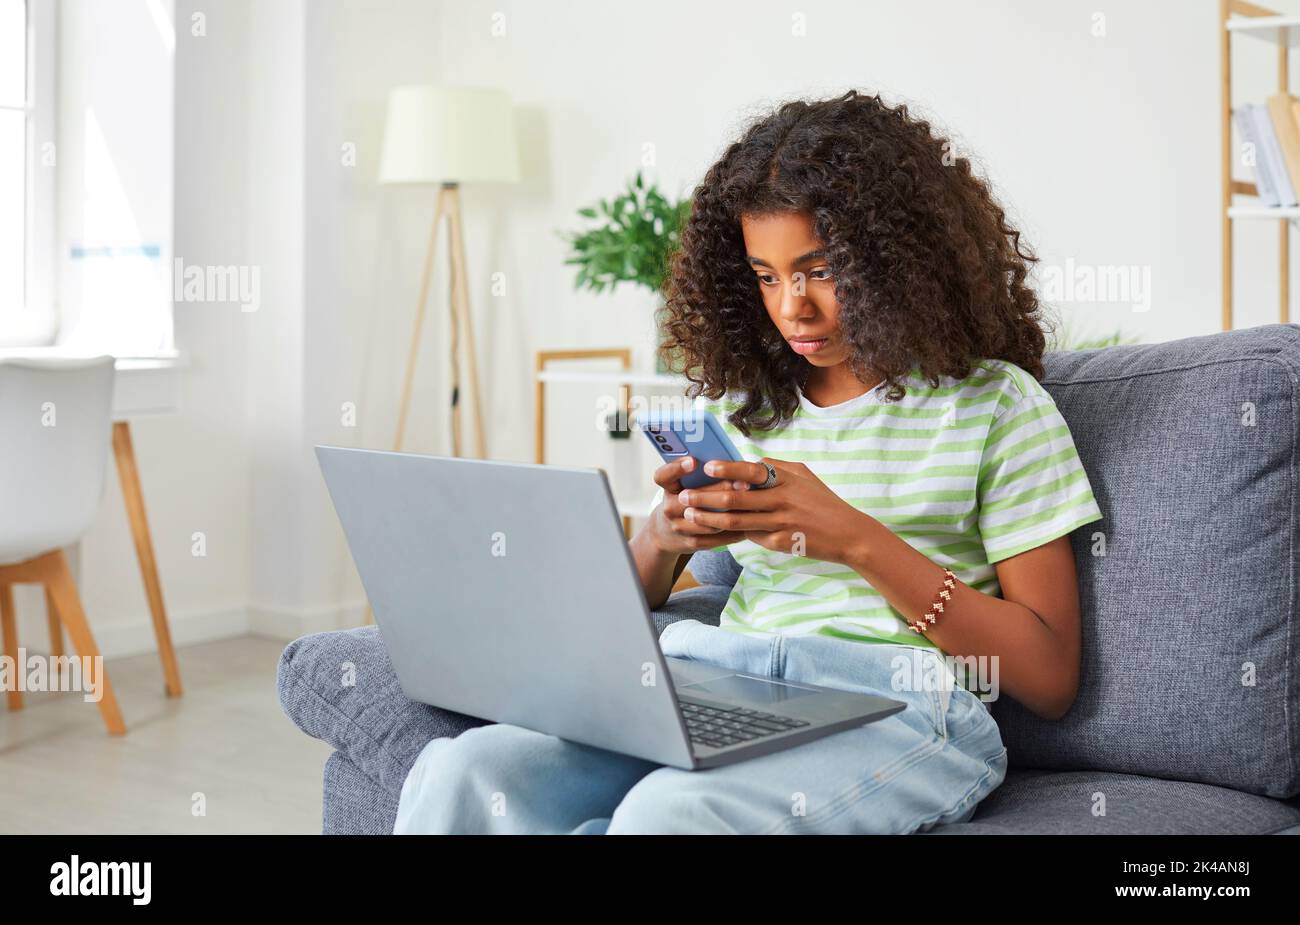 African American teenage girl who is addicted to her smartphone, laptop and social media. Stock Photo